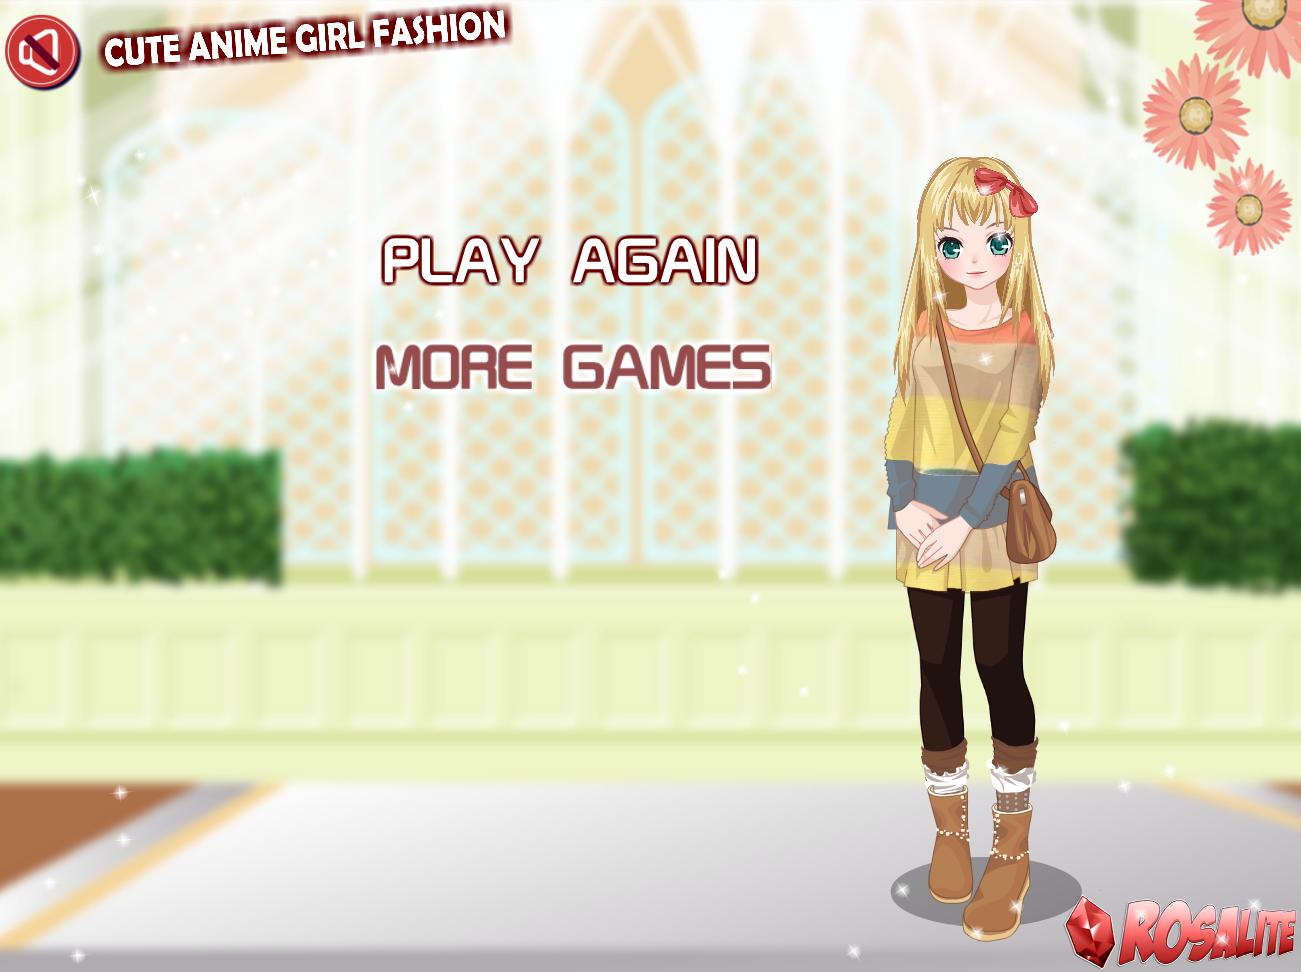 Cute Anime Girl Fashion Dress Up Face Makeup For Android Apk Download - dressing up as a cute roblox girl